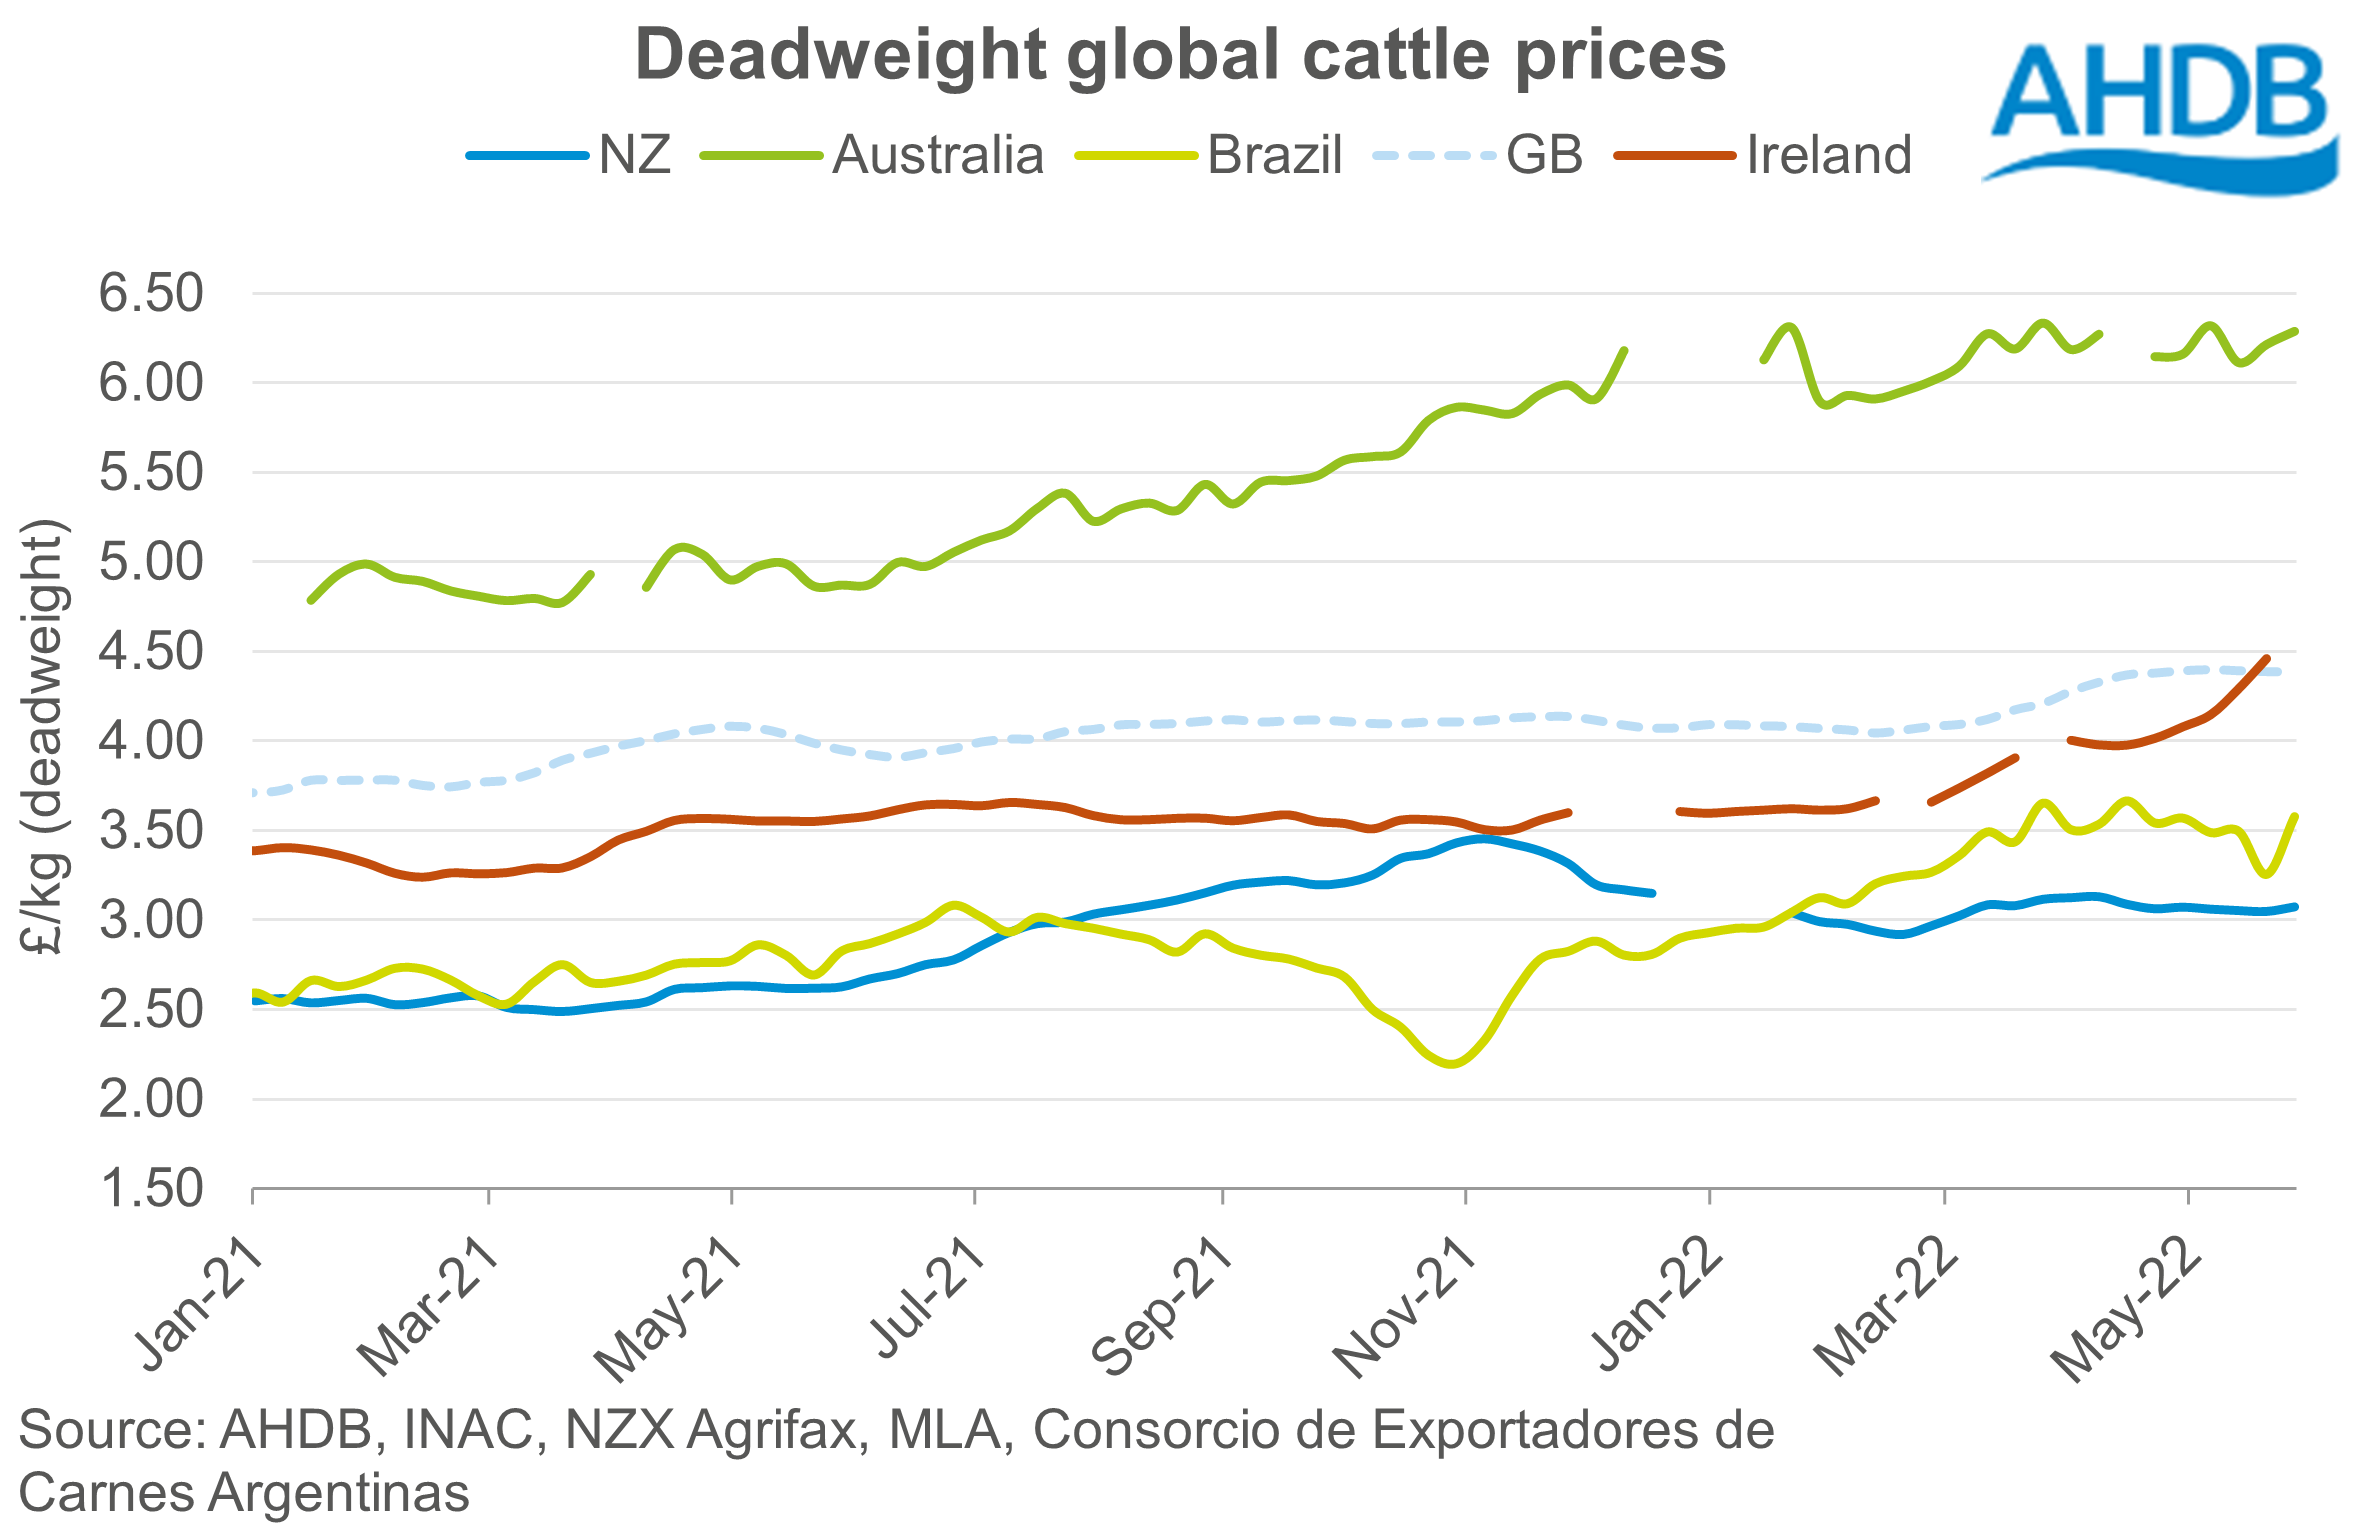 Graph showing weekly global deadweight cattle prices in GBP up to June 2022